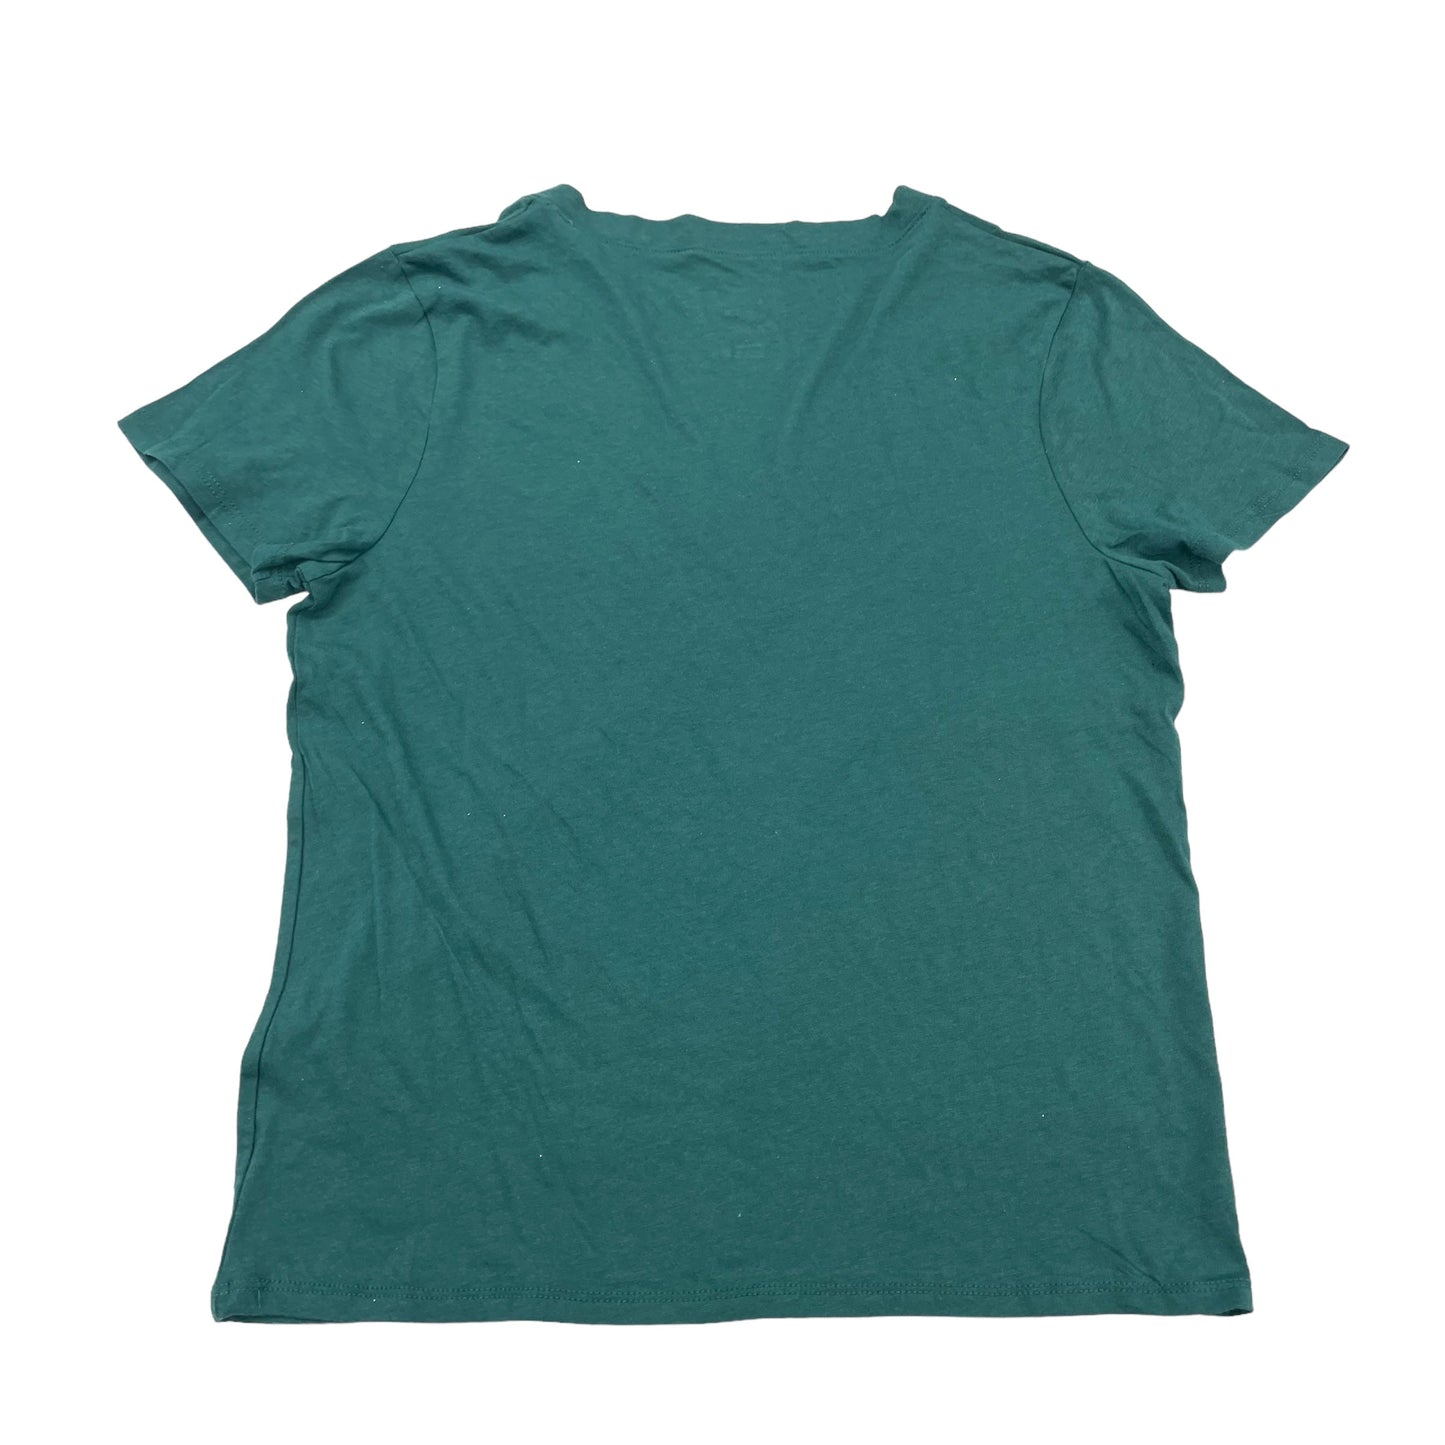 Teal Top Short Sleeve A New Day, Size Xs